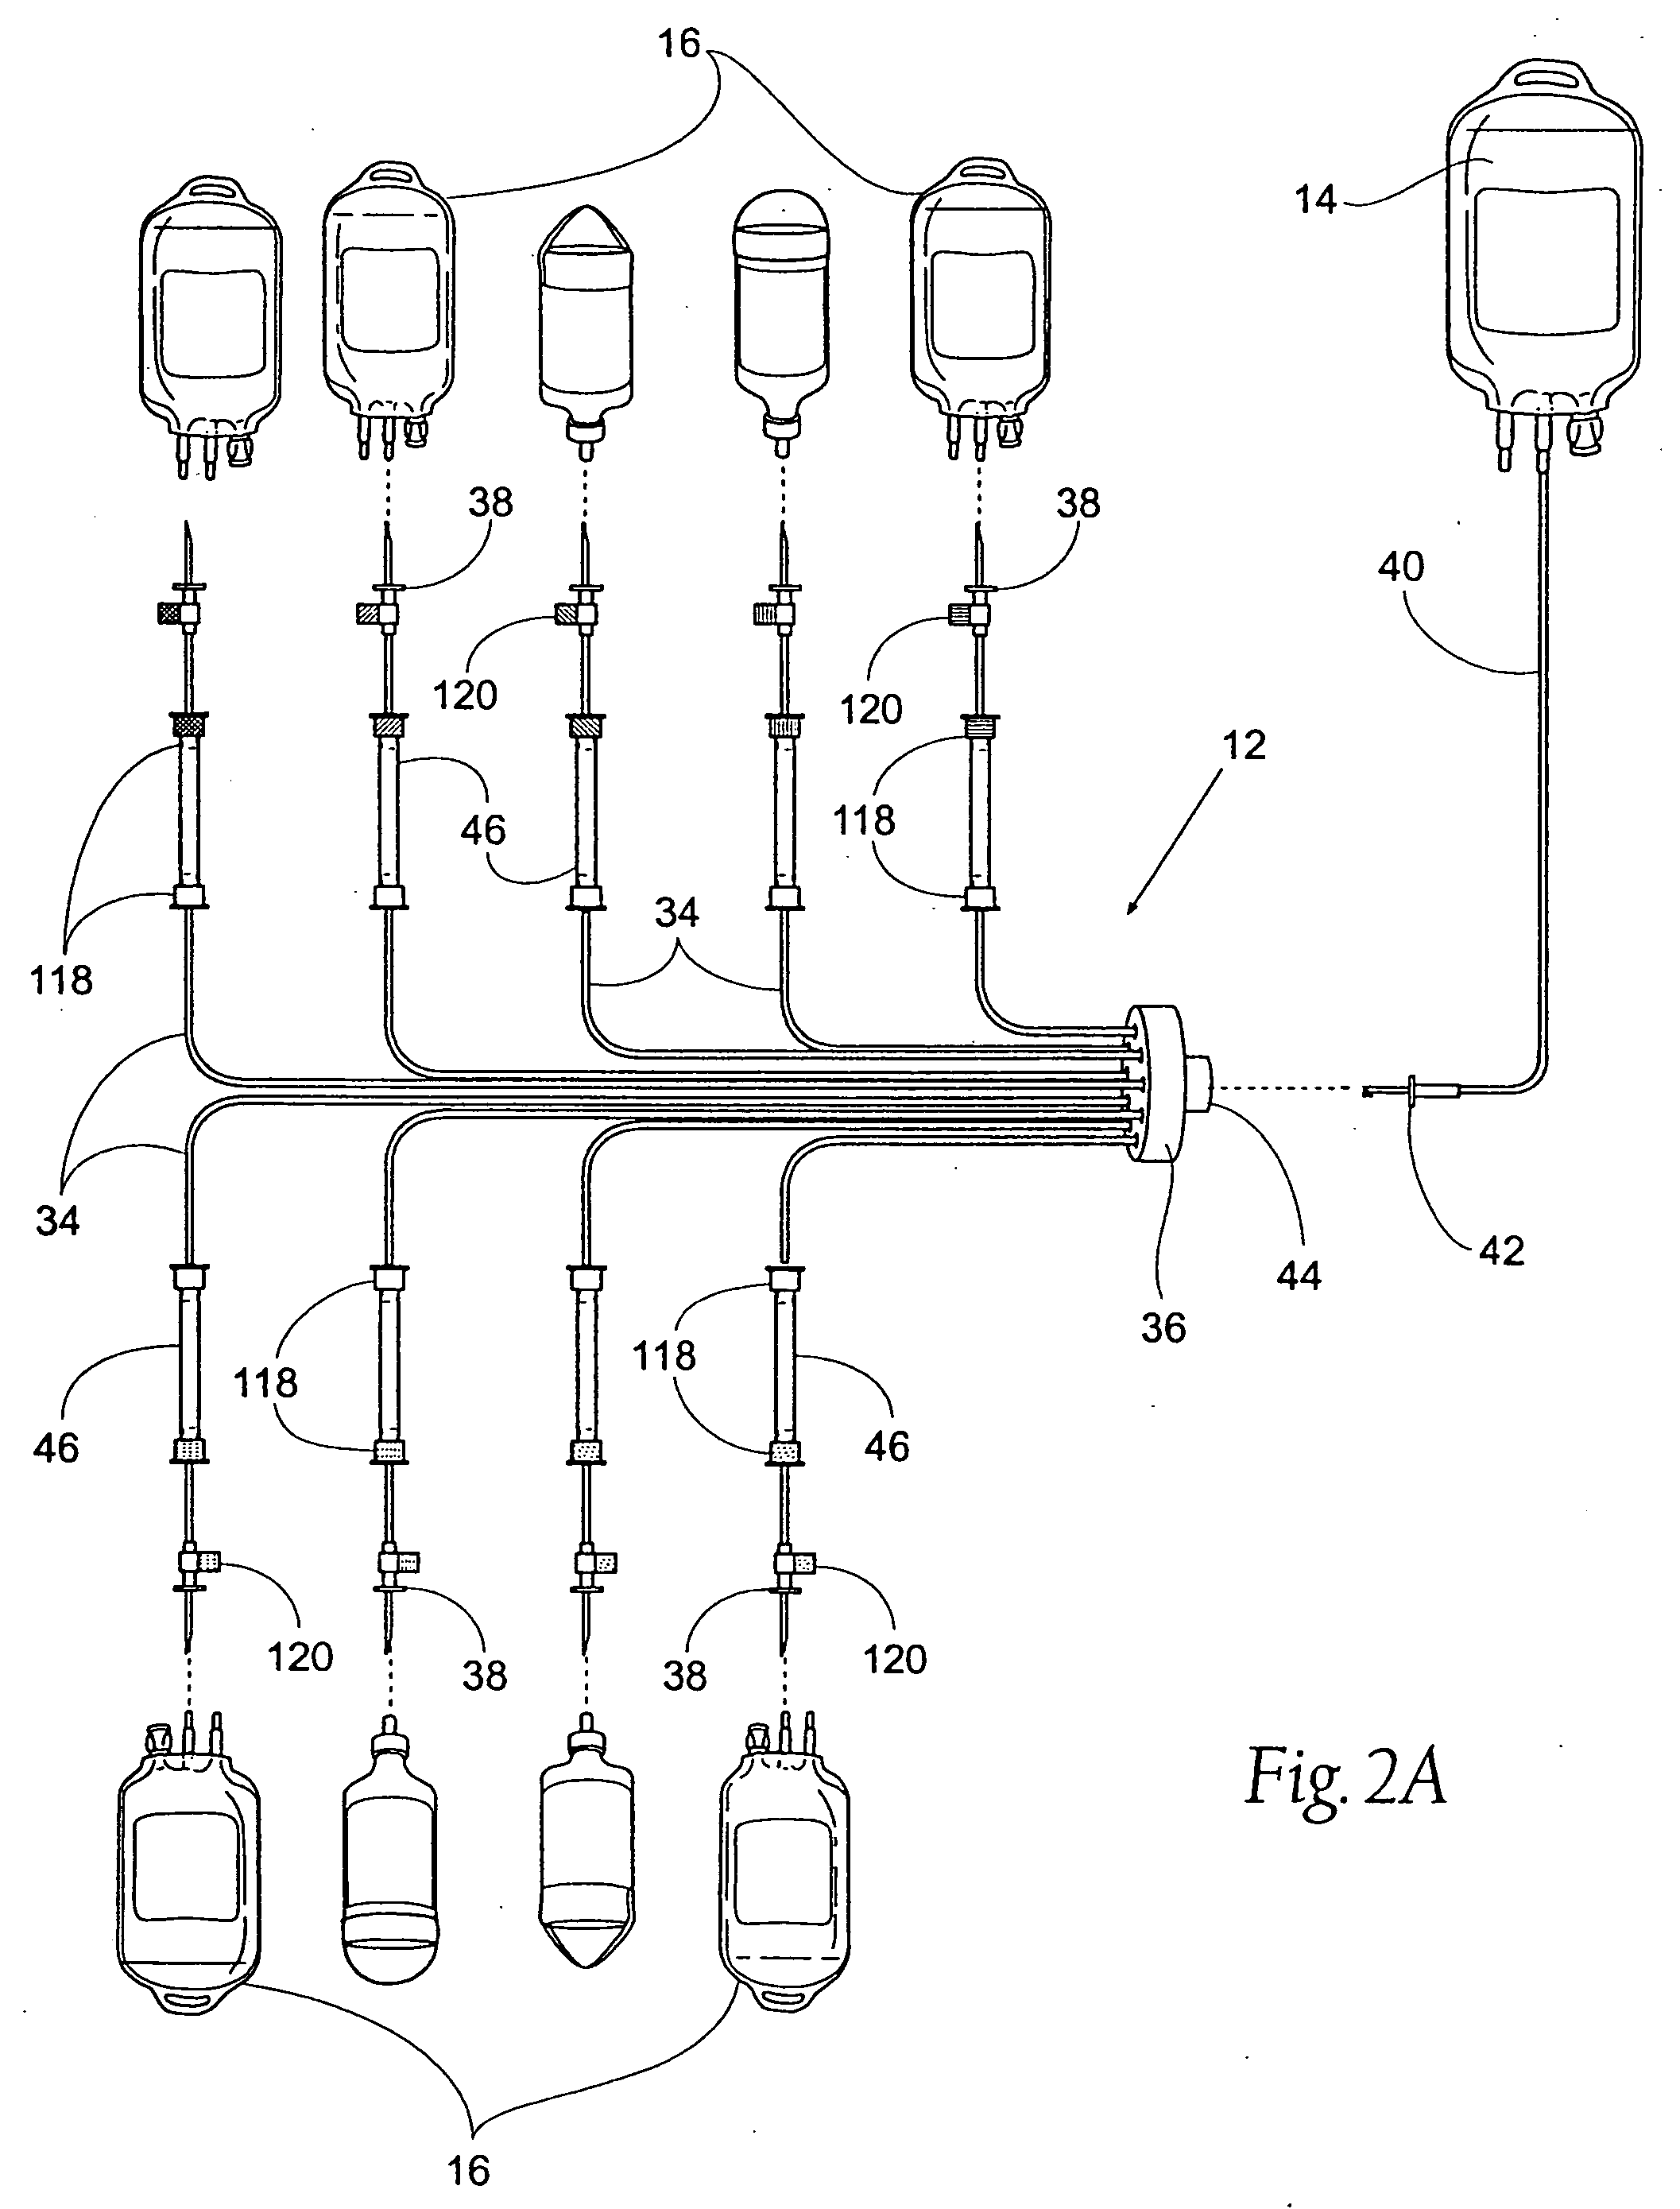 Apparatus and method for transferring data to a pharmaceutical compounding system